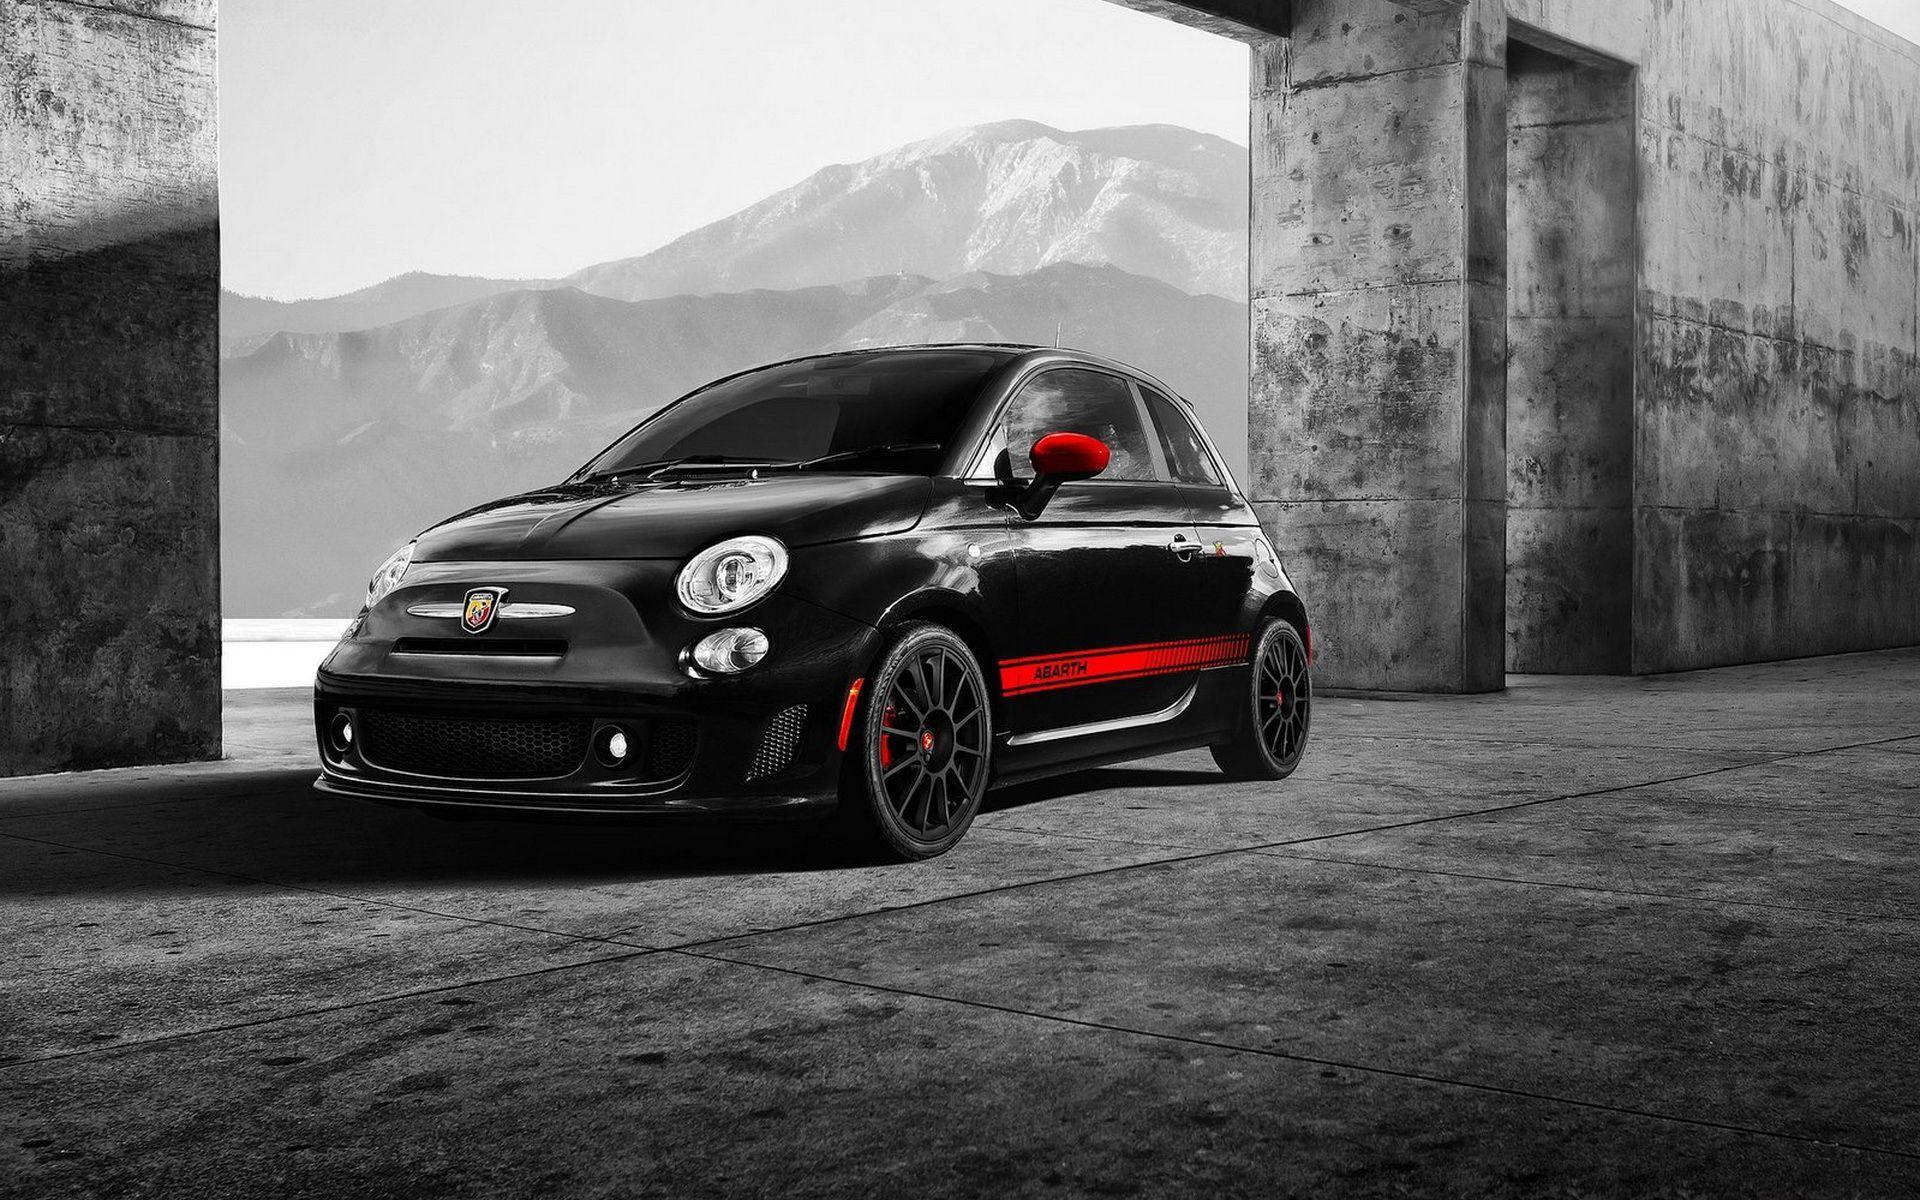 Fiat 500 Abarth Wallpaper And Image, Picture, Photo